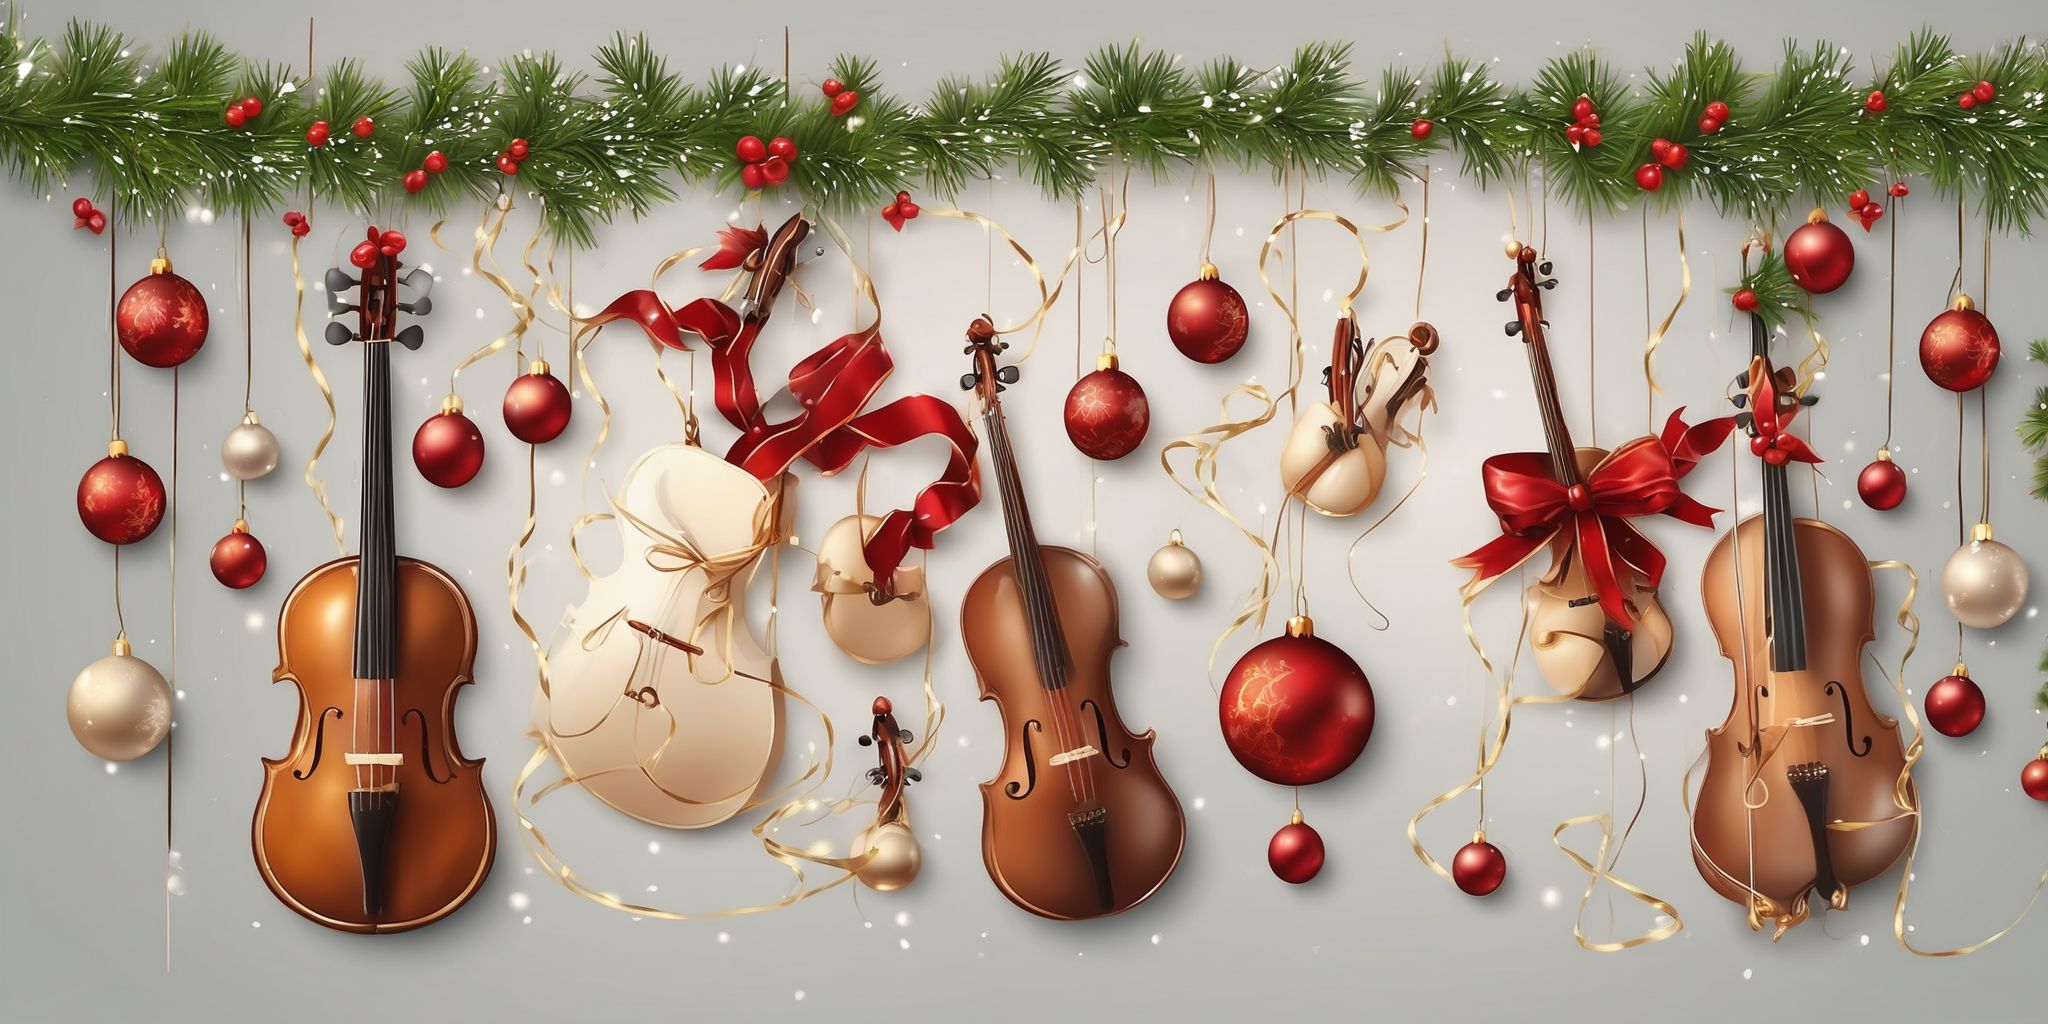 Strings in realistic Christmas style